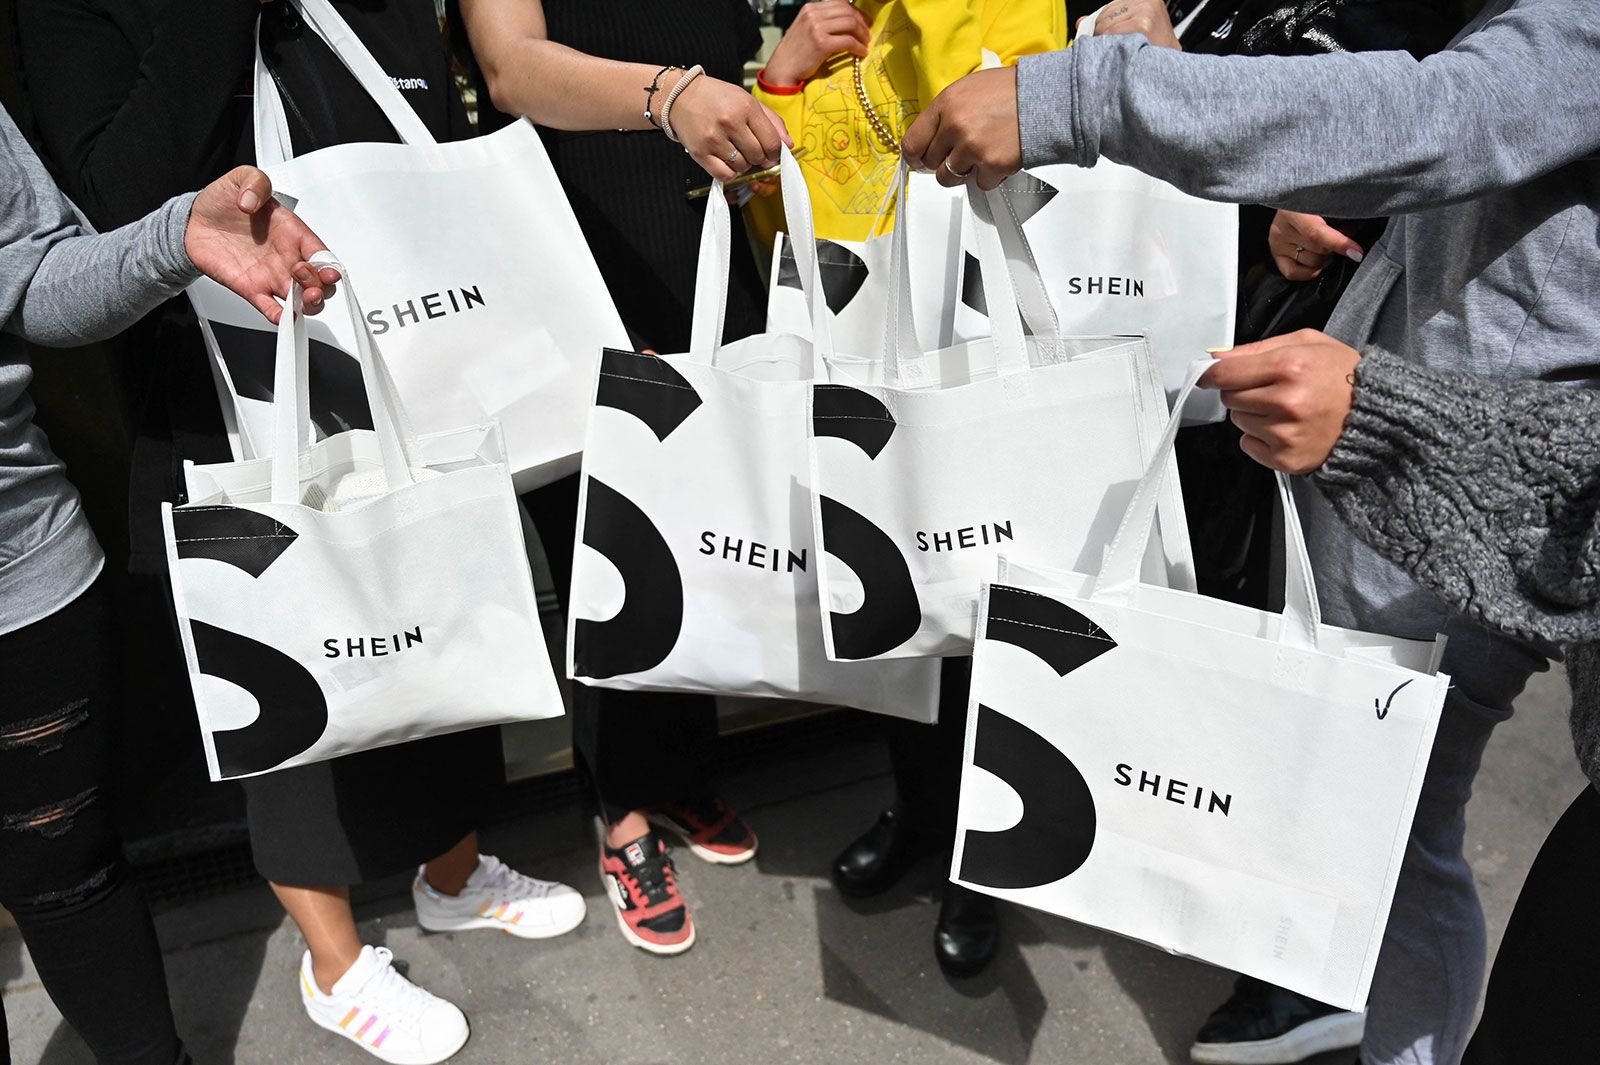 Shein sent American influencers to China. Social media users are furious